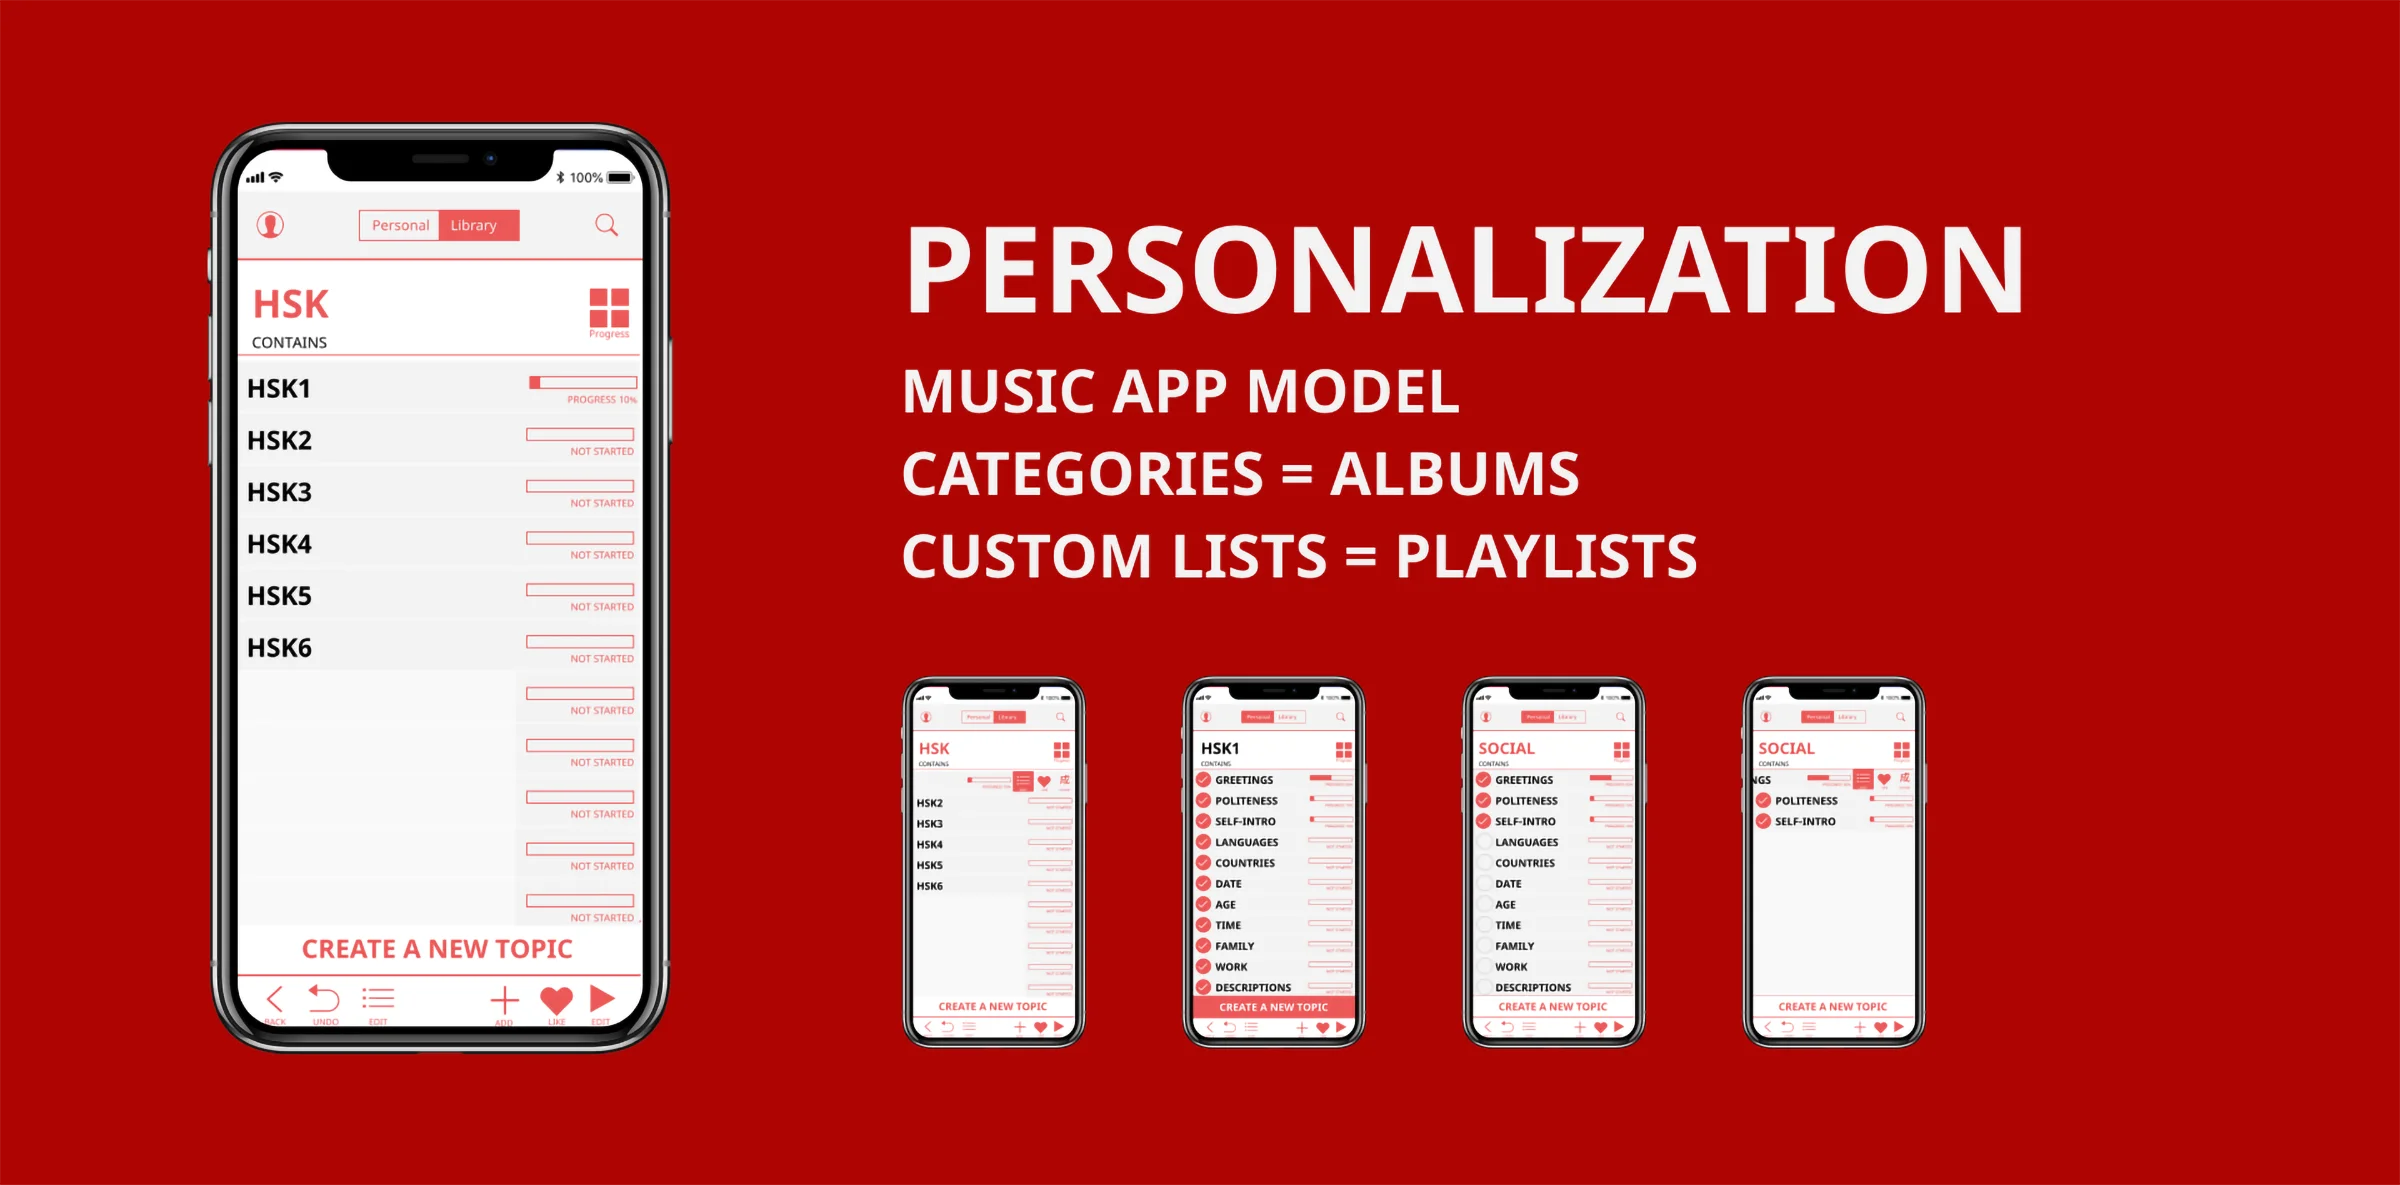 Personalization: music app model with categories like albums and custom lists like playlists.